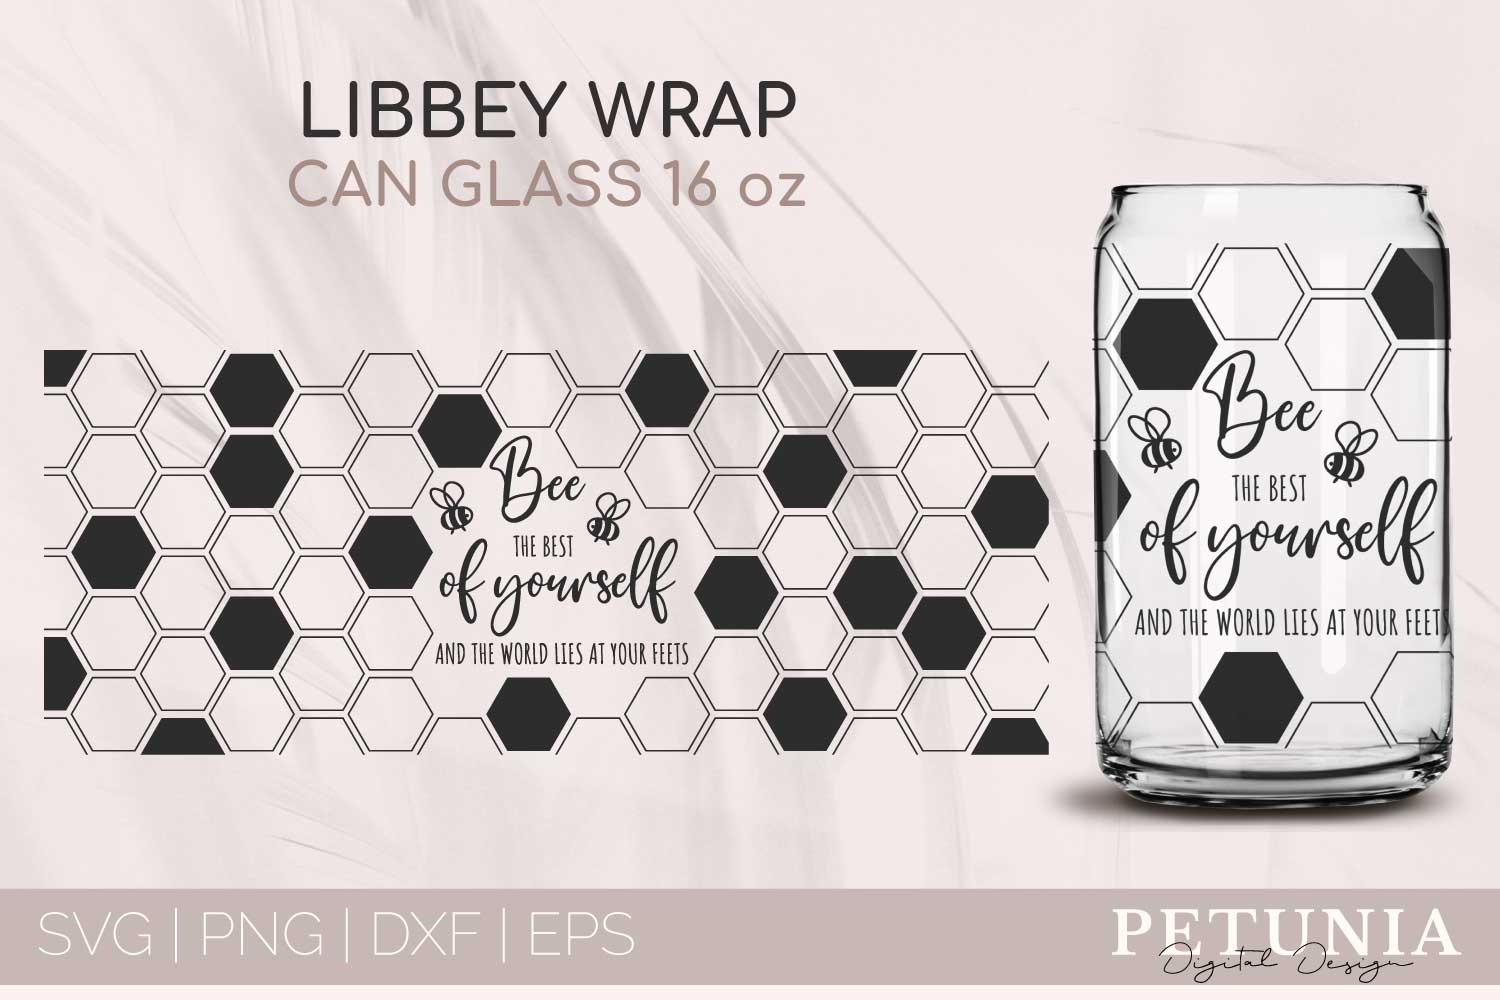 Retro Libbey Glass Wrap  Good Vibes Can Glass SVG - So Fontsy